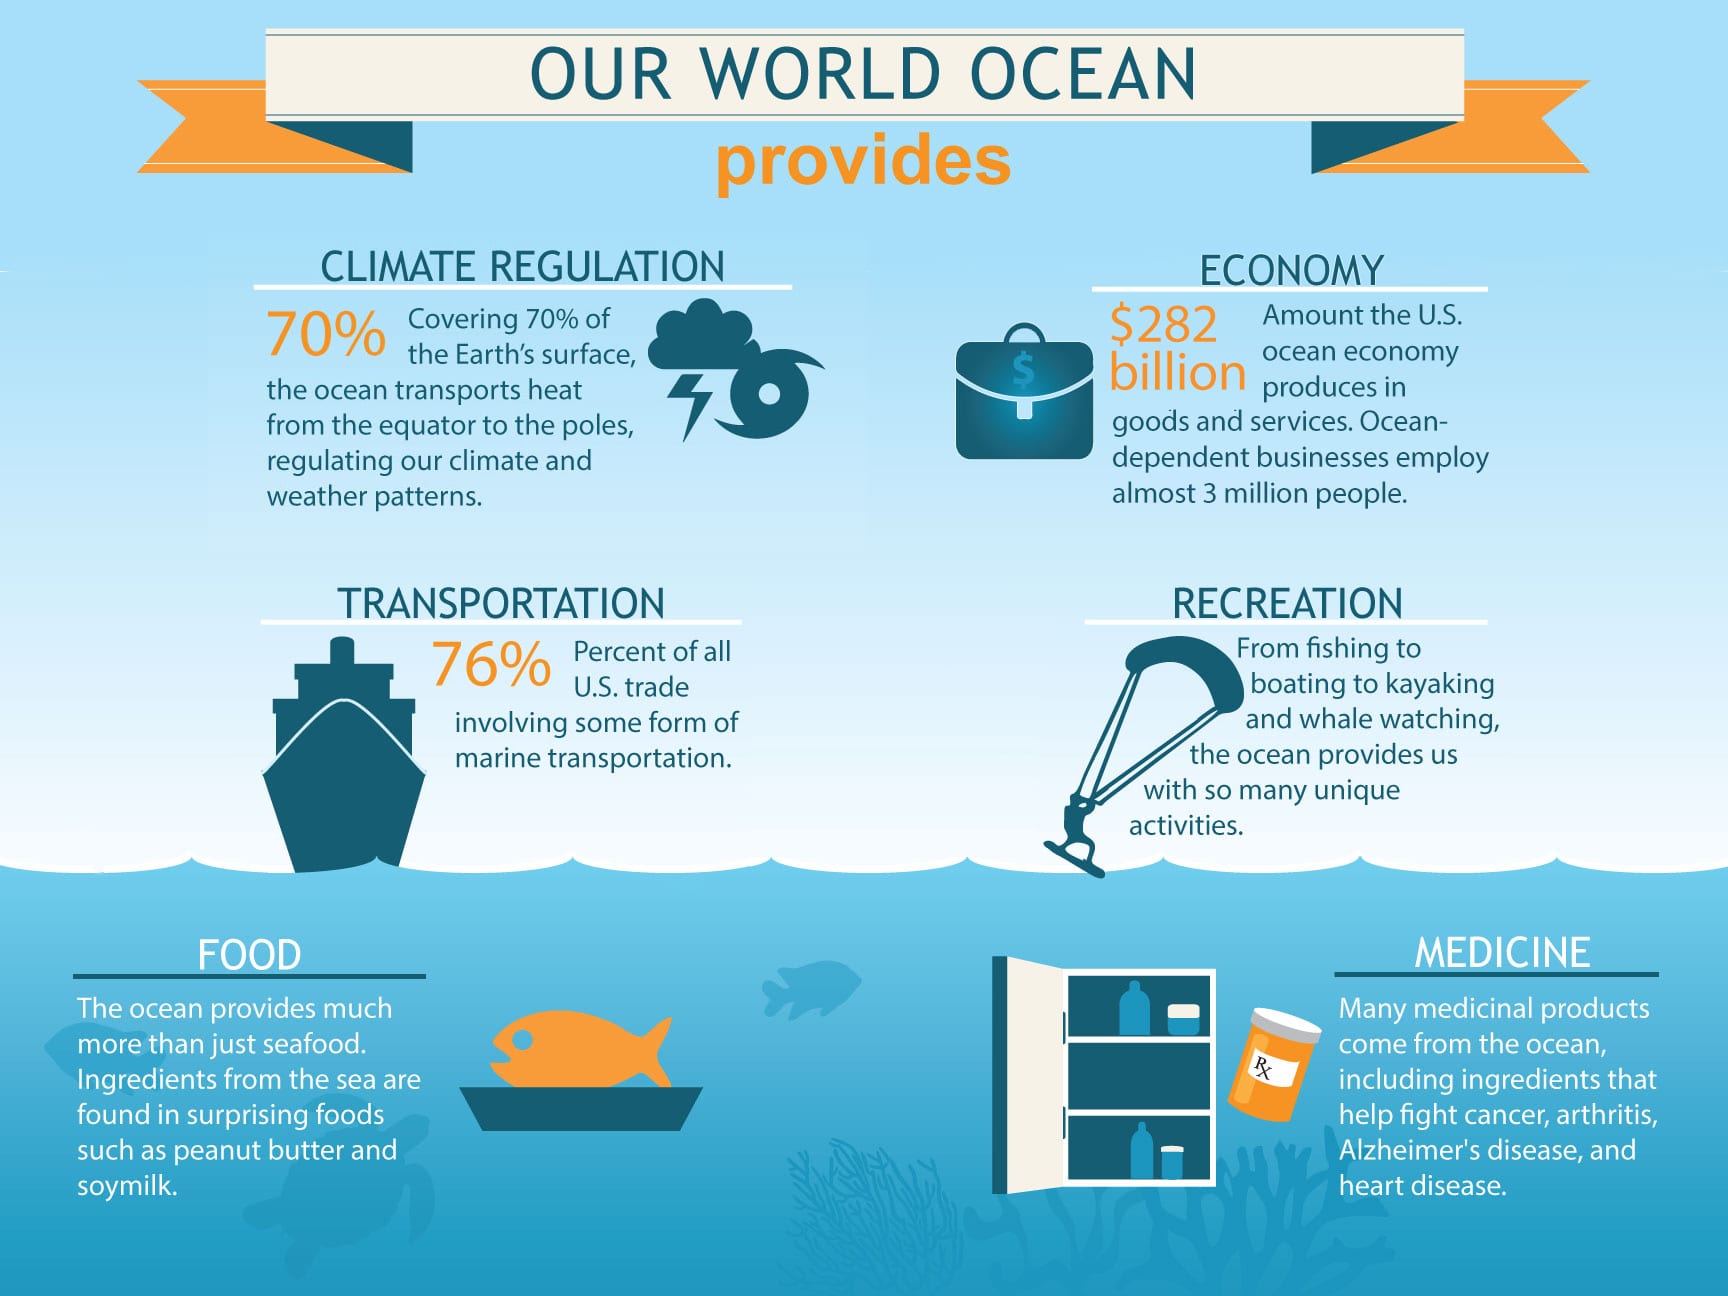 infographic showing benefits of the ocean; text content of graphic can be found in the image caption